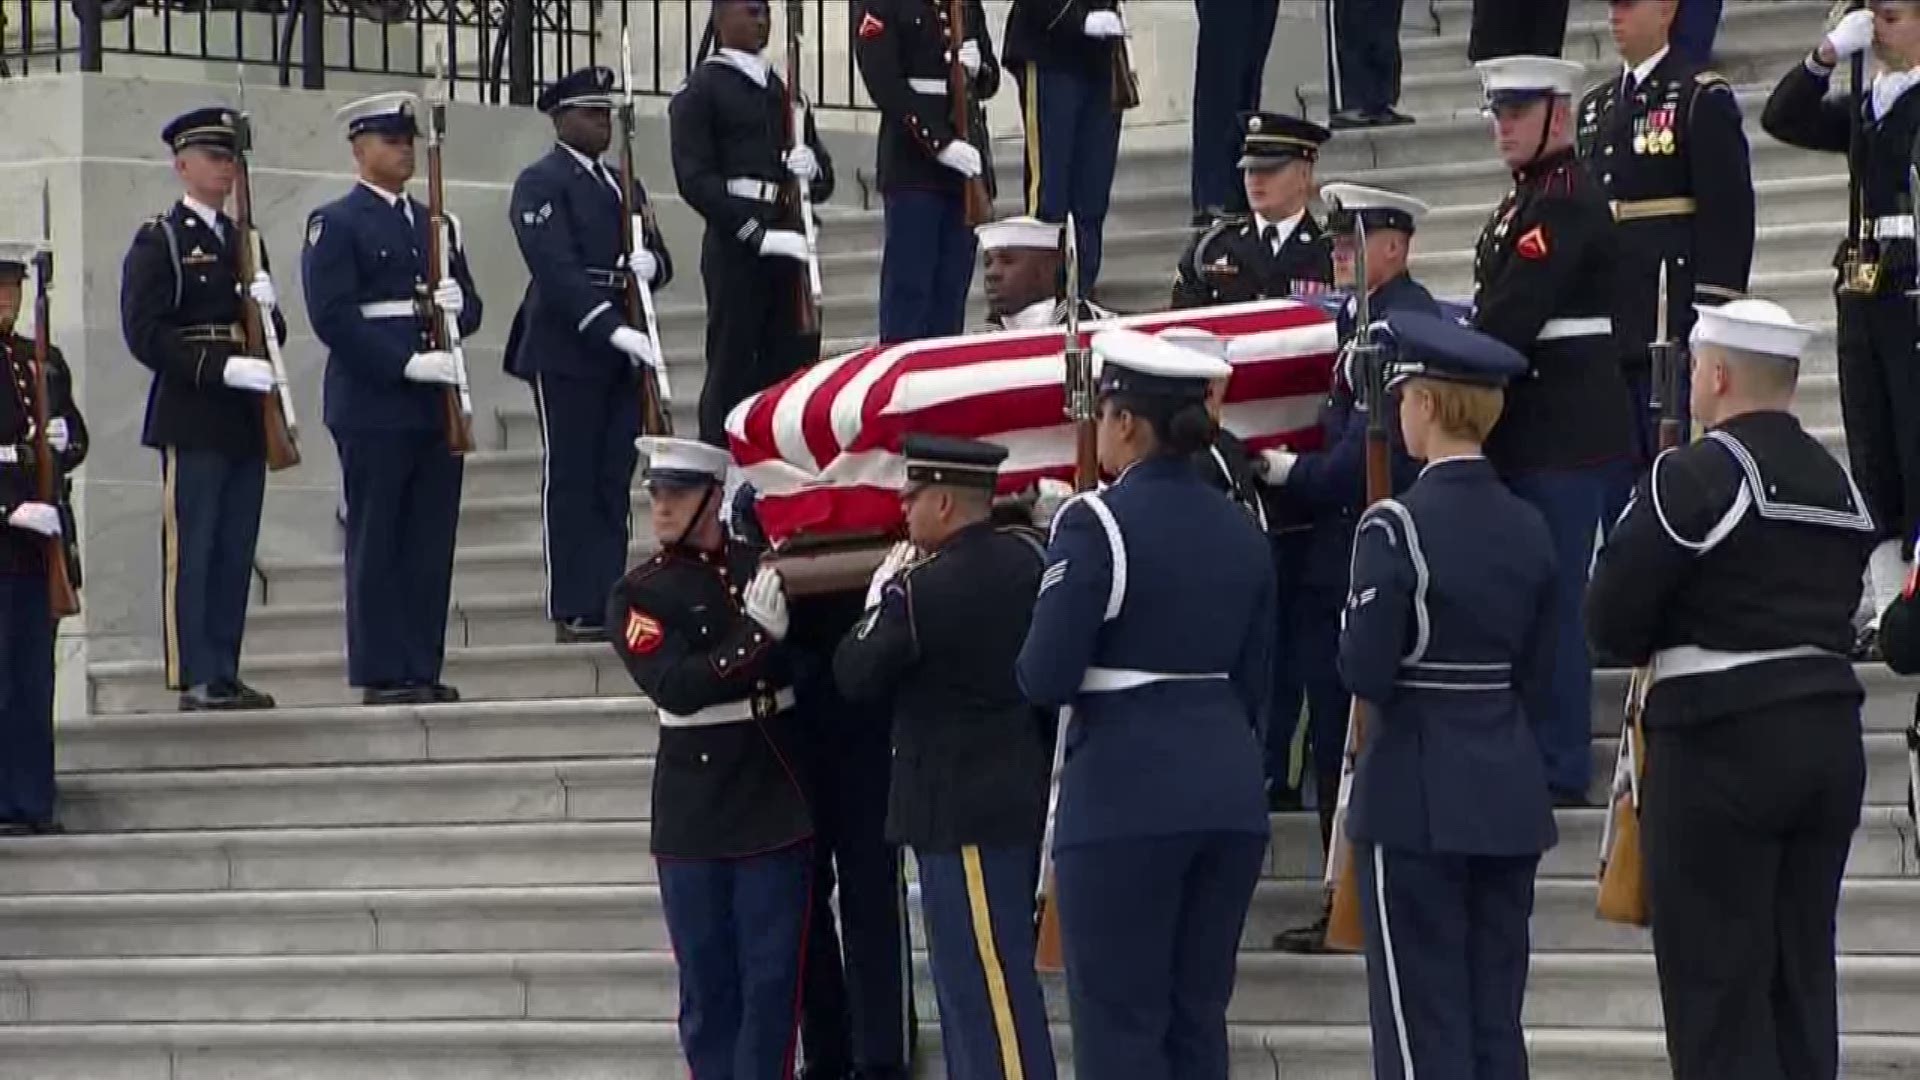 Bush's state funeral will be held at the Washington National Cathedral.